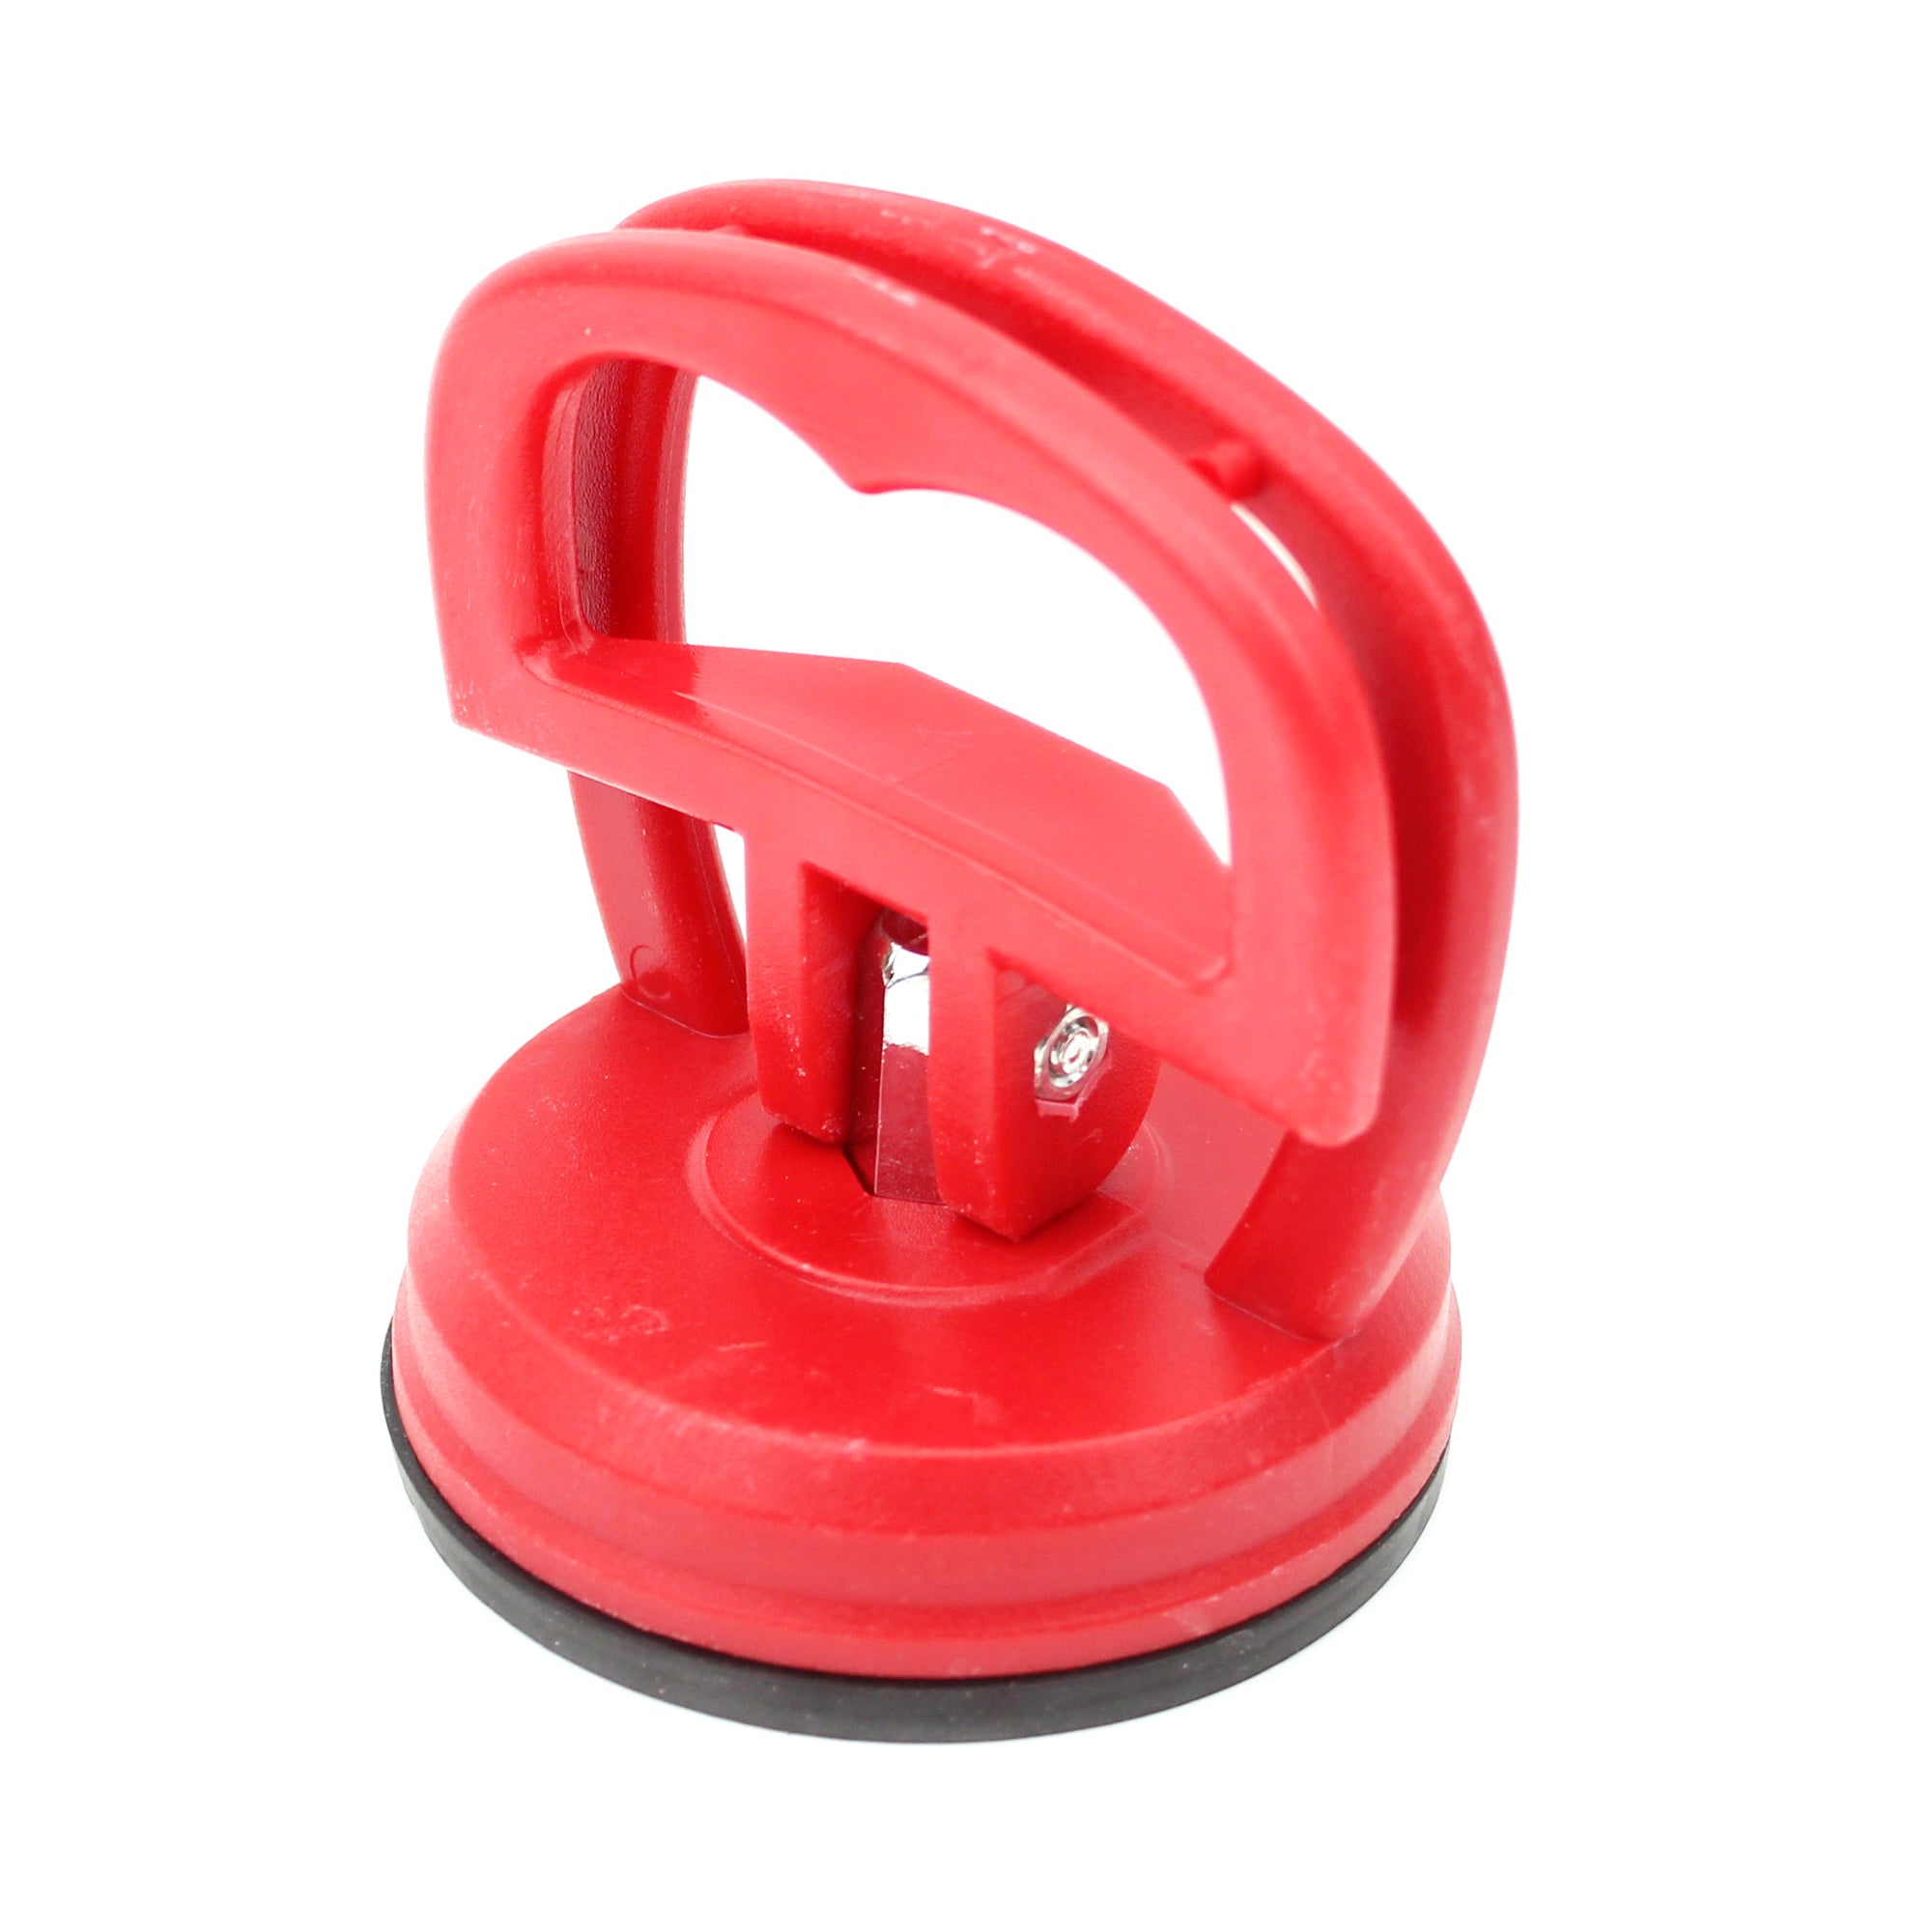 P8822 Powerful Suction Cup Dent Puller Mobile Phone Glass Panel Repair Tool - Red